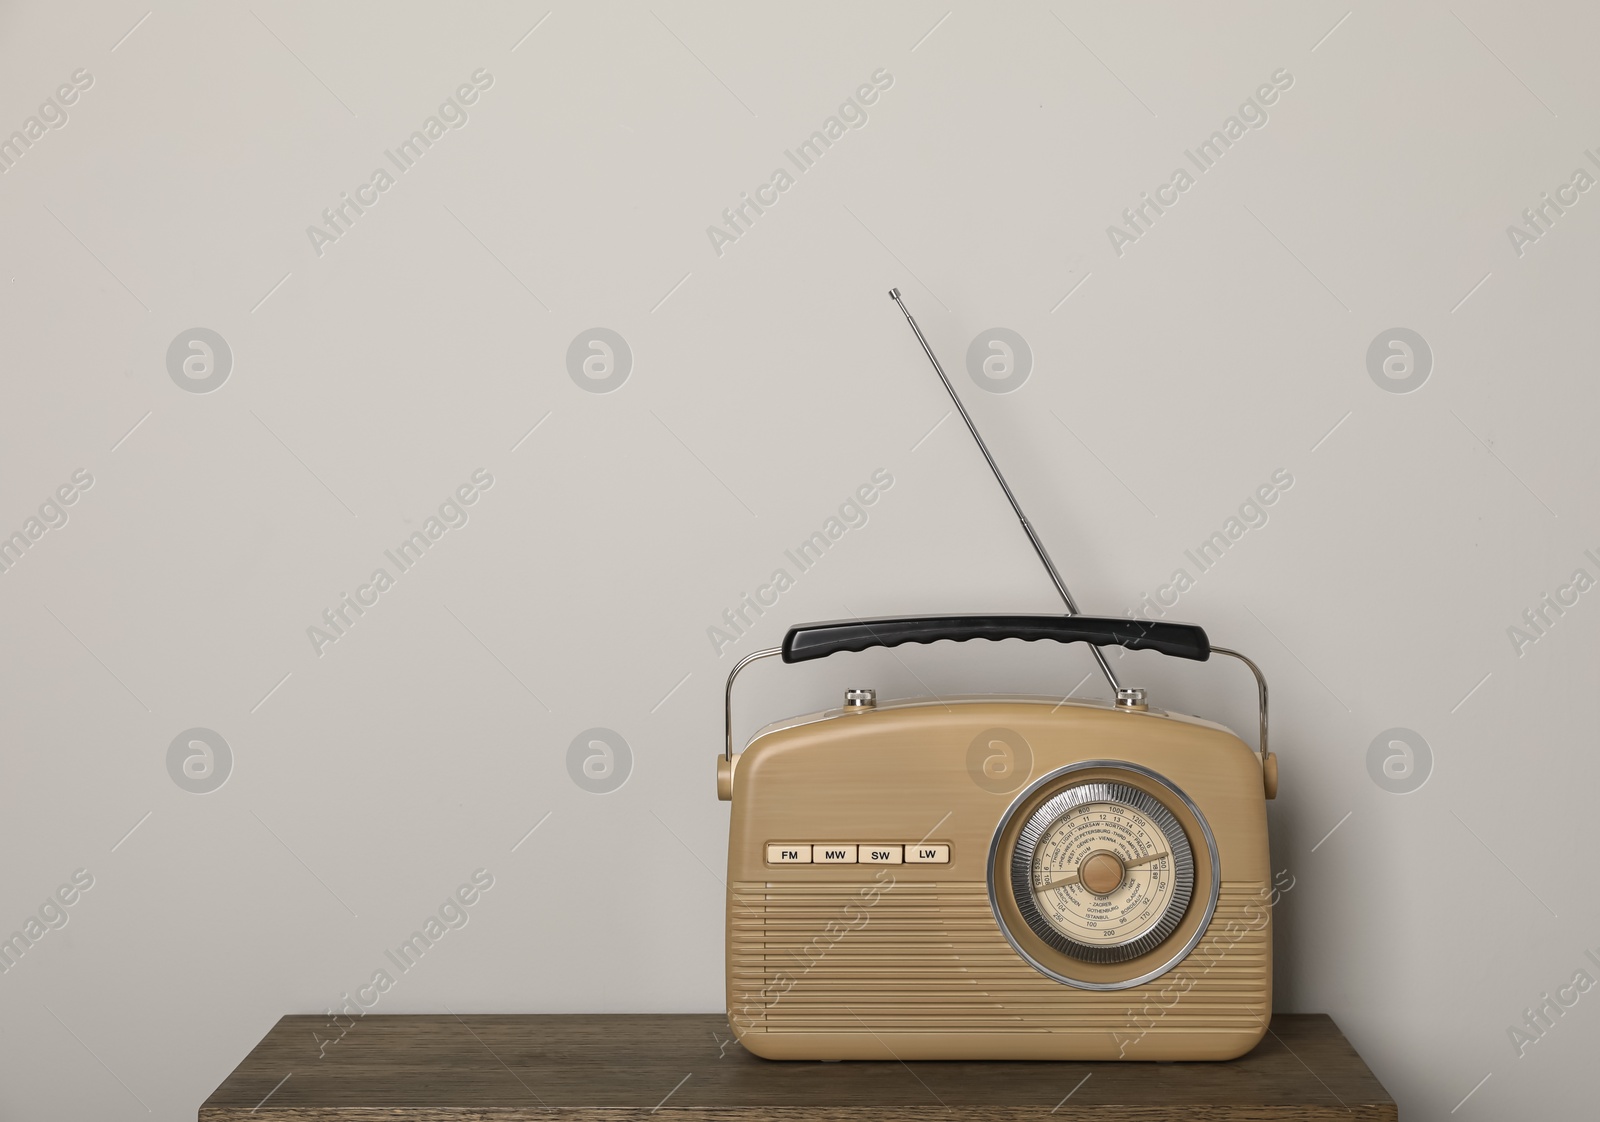 Photo of Retro radio receiver on wooden table against light grey background. Space for text